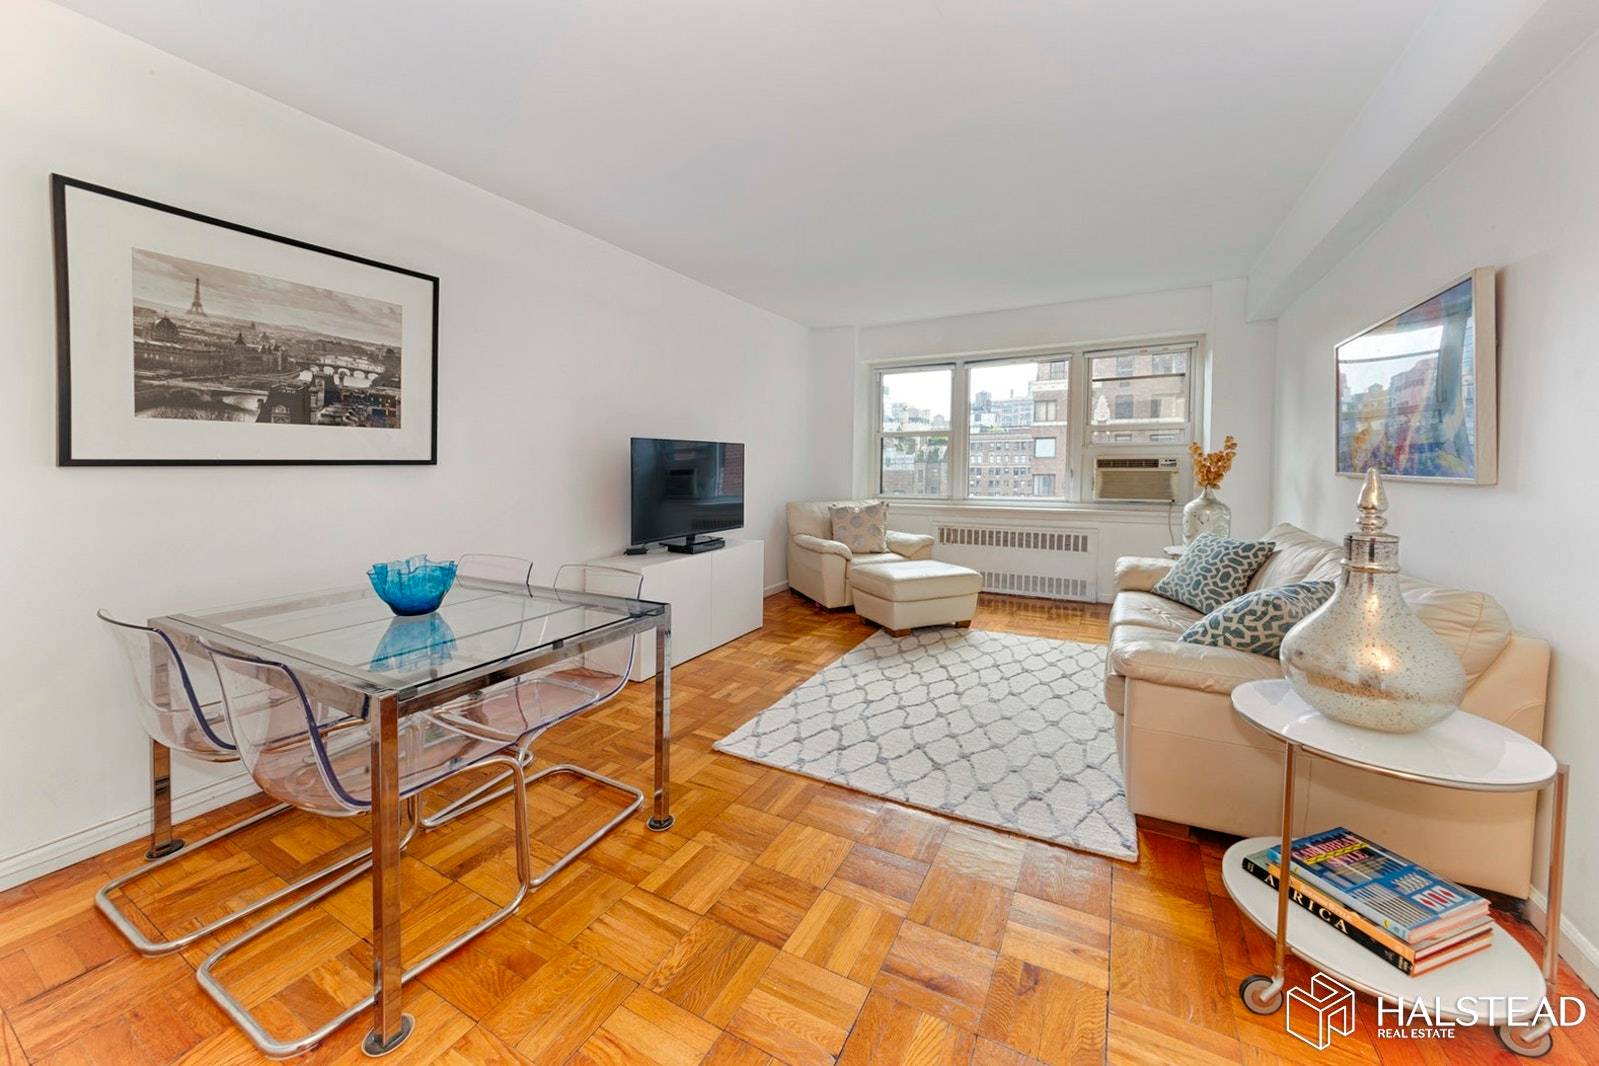 This sun filled and quiet home is located on the fourteenth floor of the West Wing of Schwab House and it is set back from the street over the building's ...